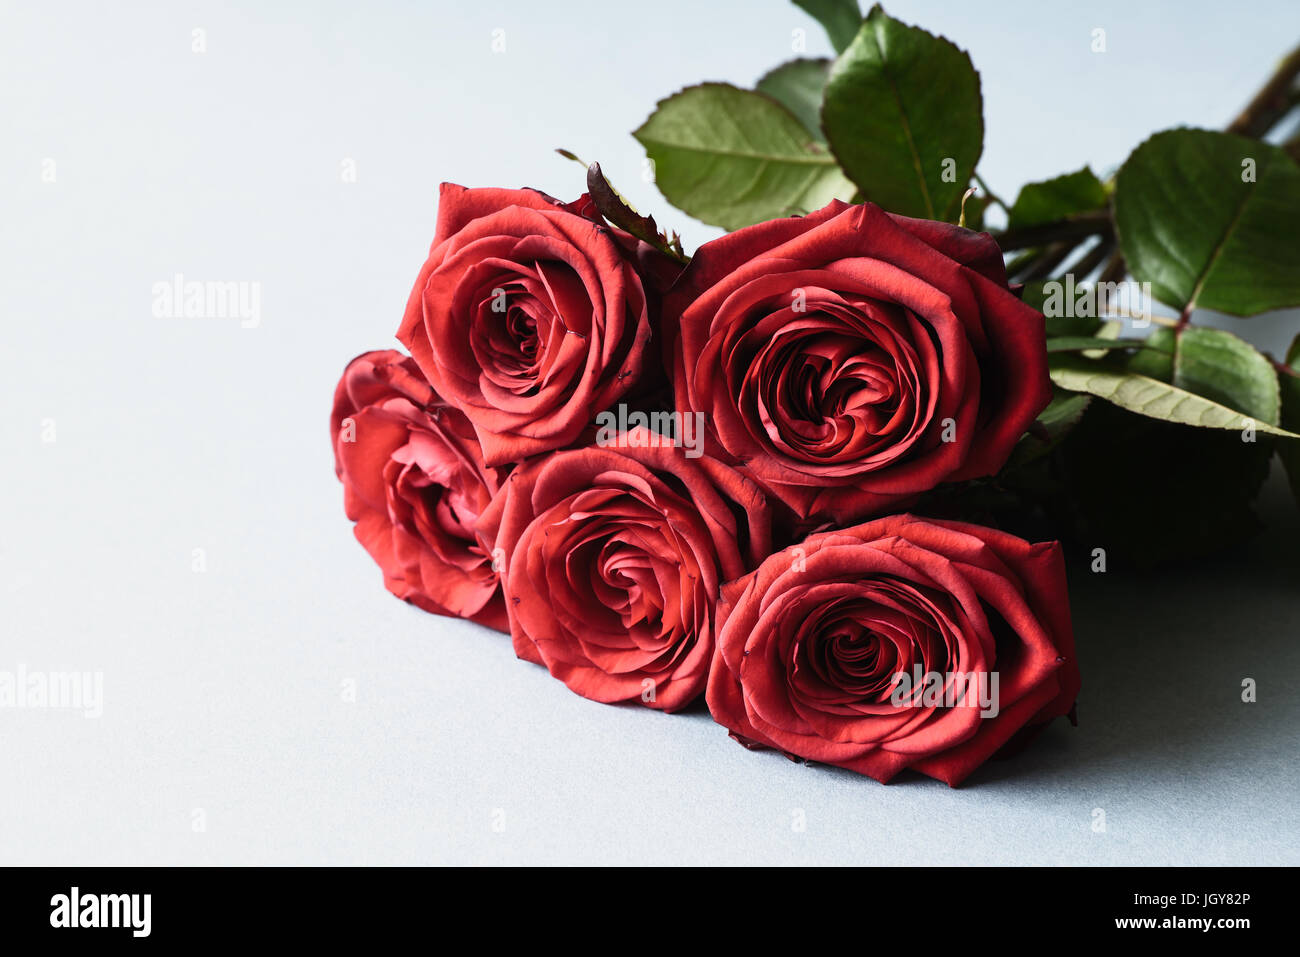 Red roses, a bouqet on a light blue background Stock Photo